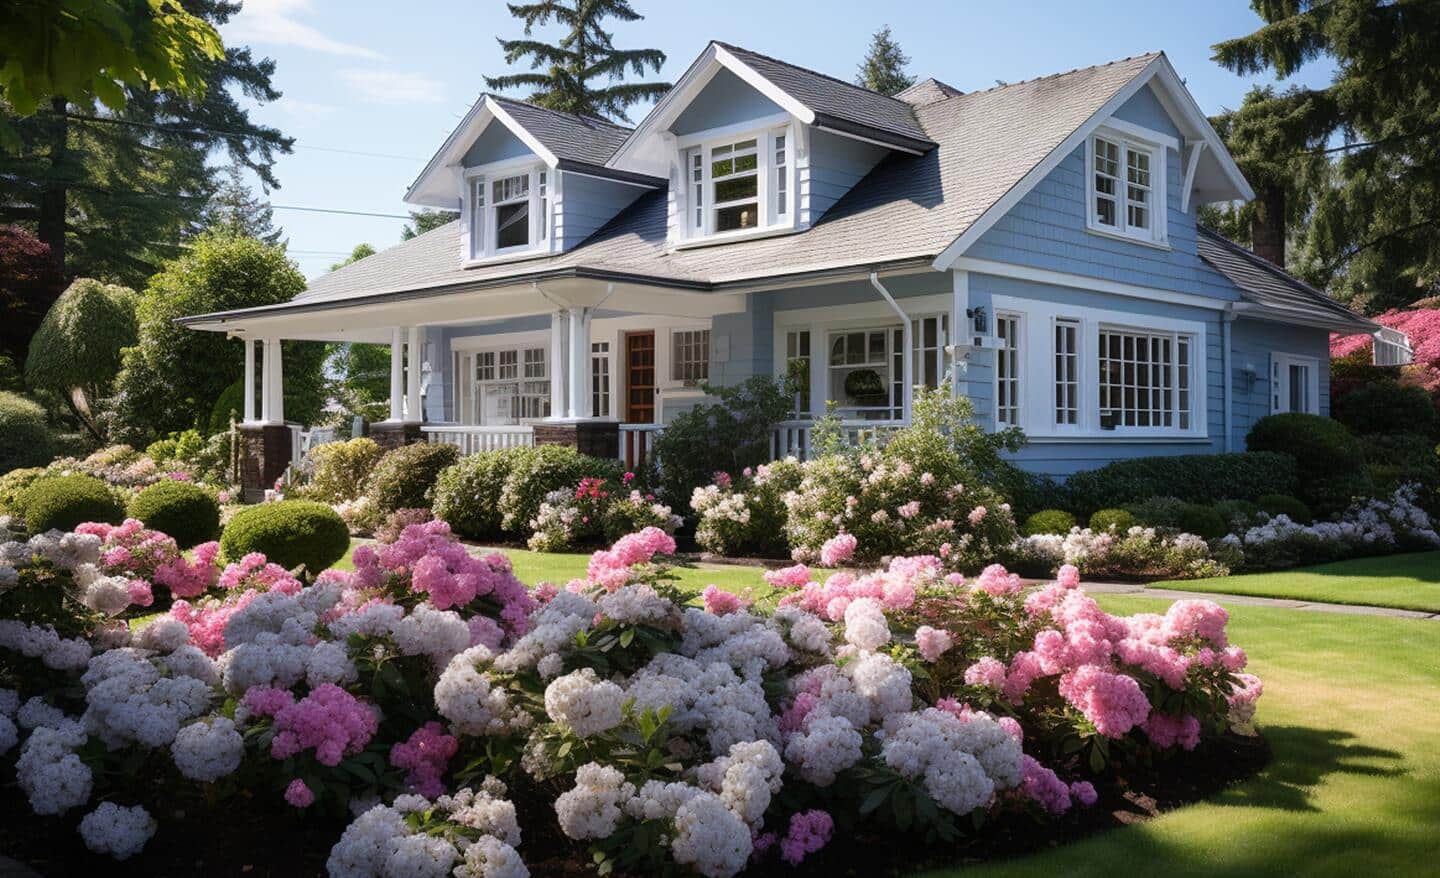 Blooming hydrangeas in shade in front of a house